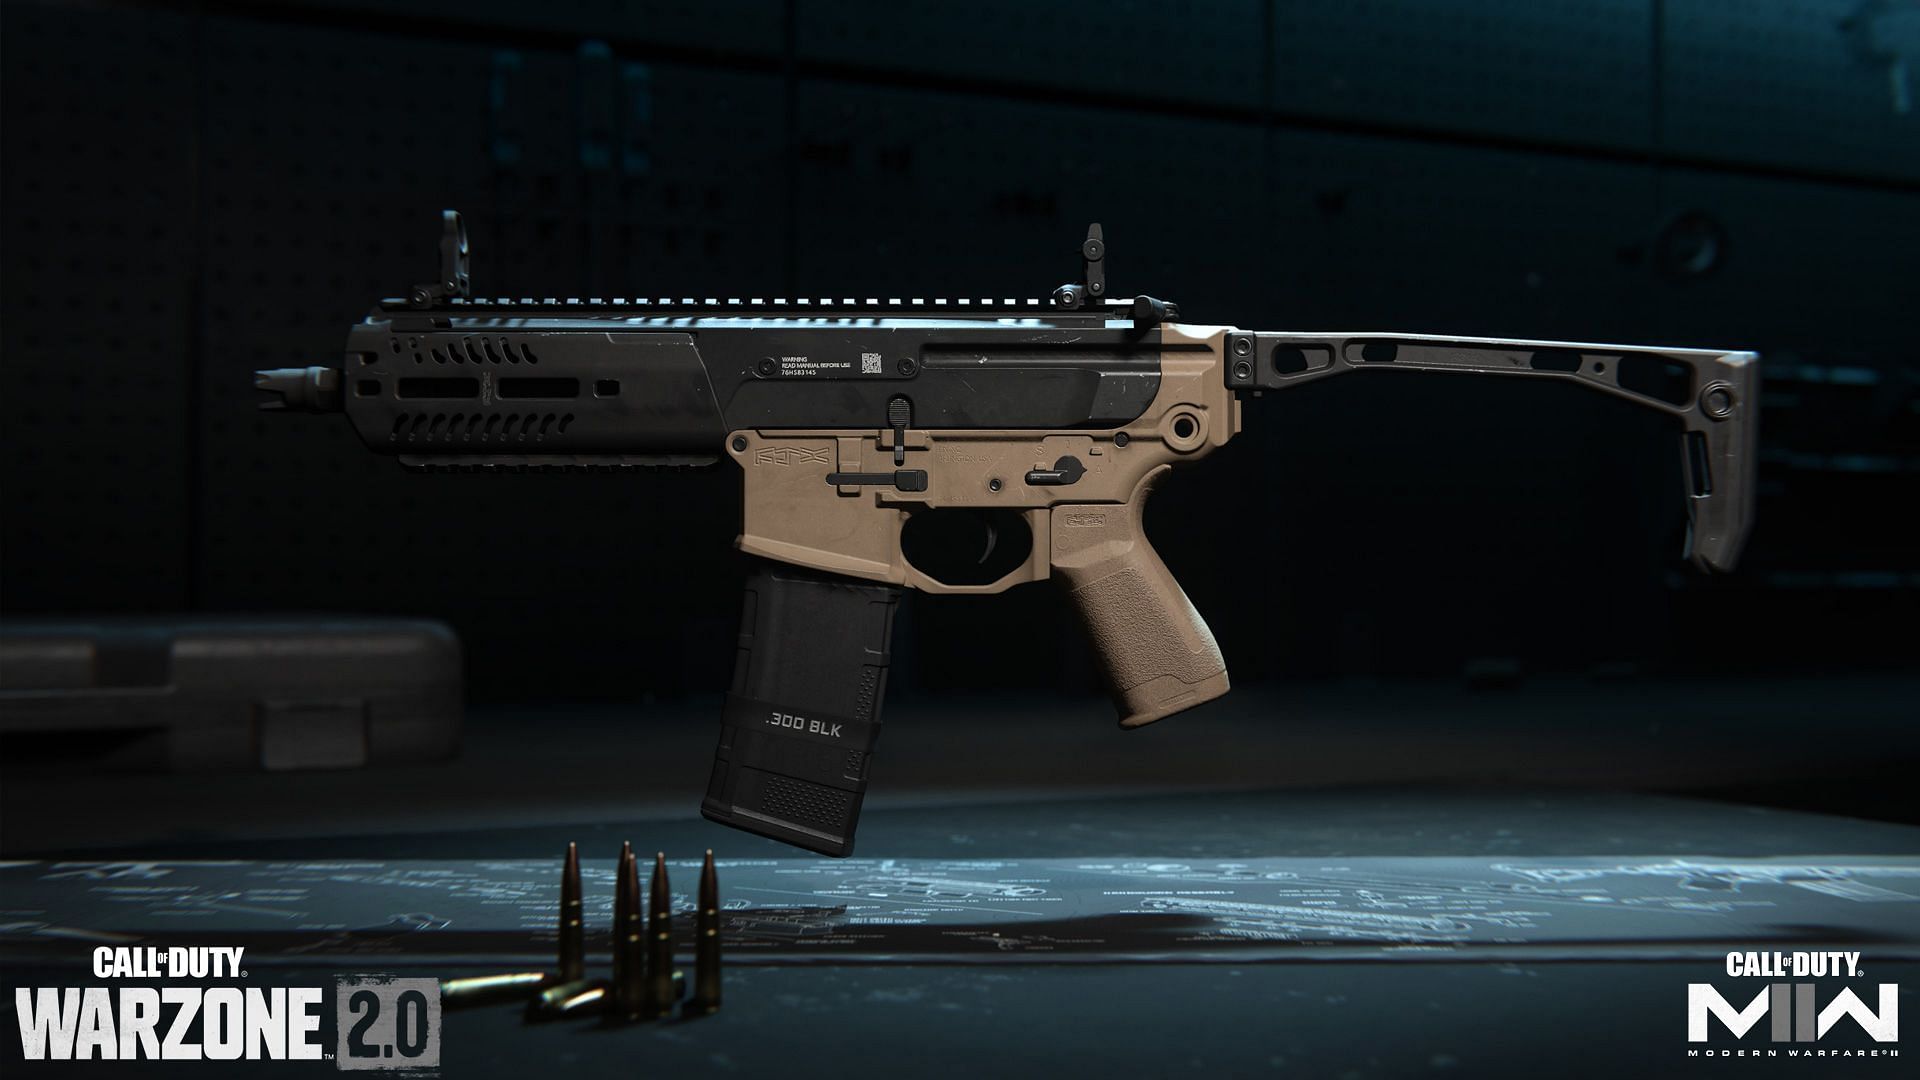 An M13C Assault Rifle being showcased with a Warzone 2 logo at the bottom left corner and a MW2 logo at the bottom right corner.